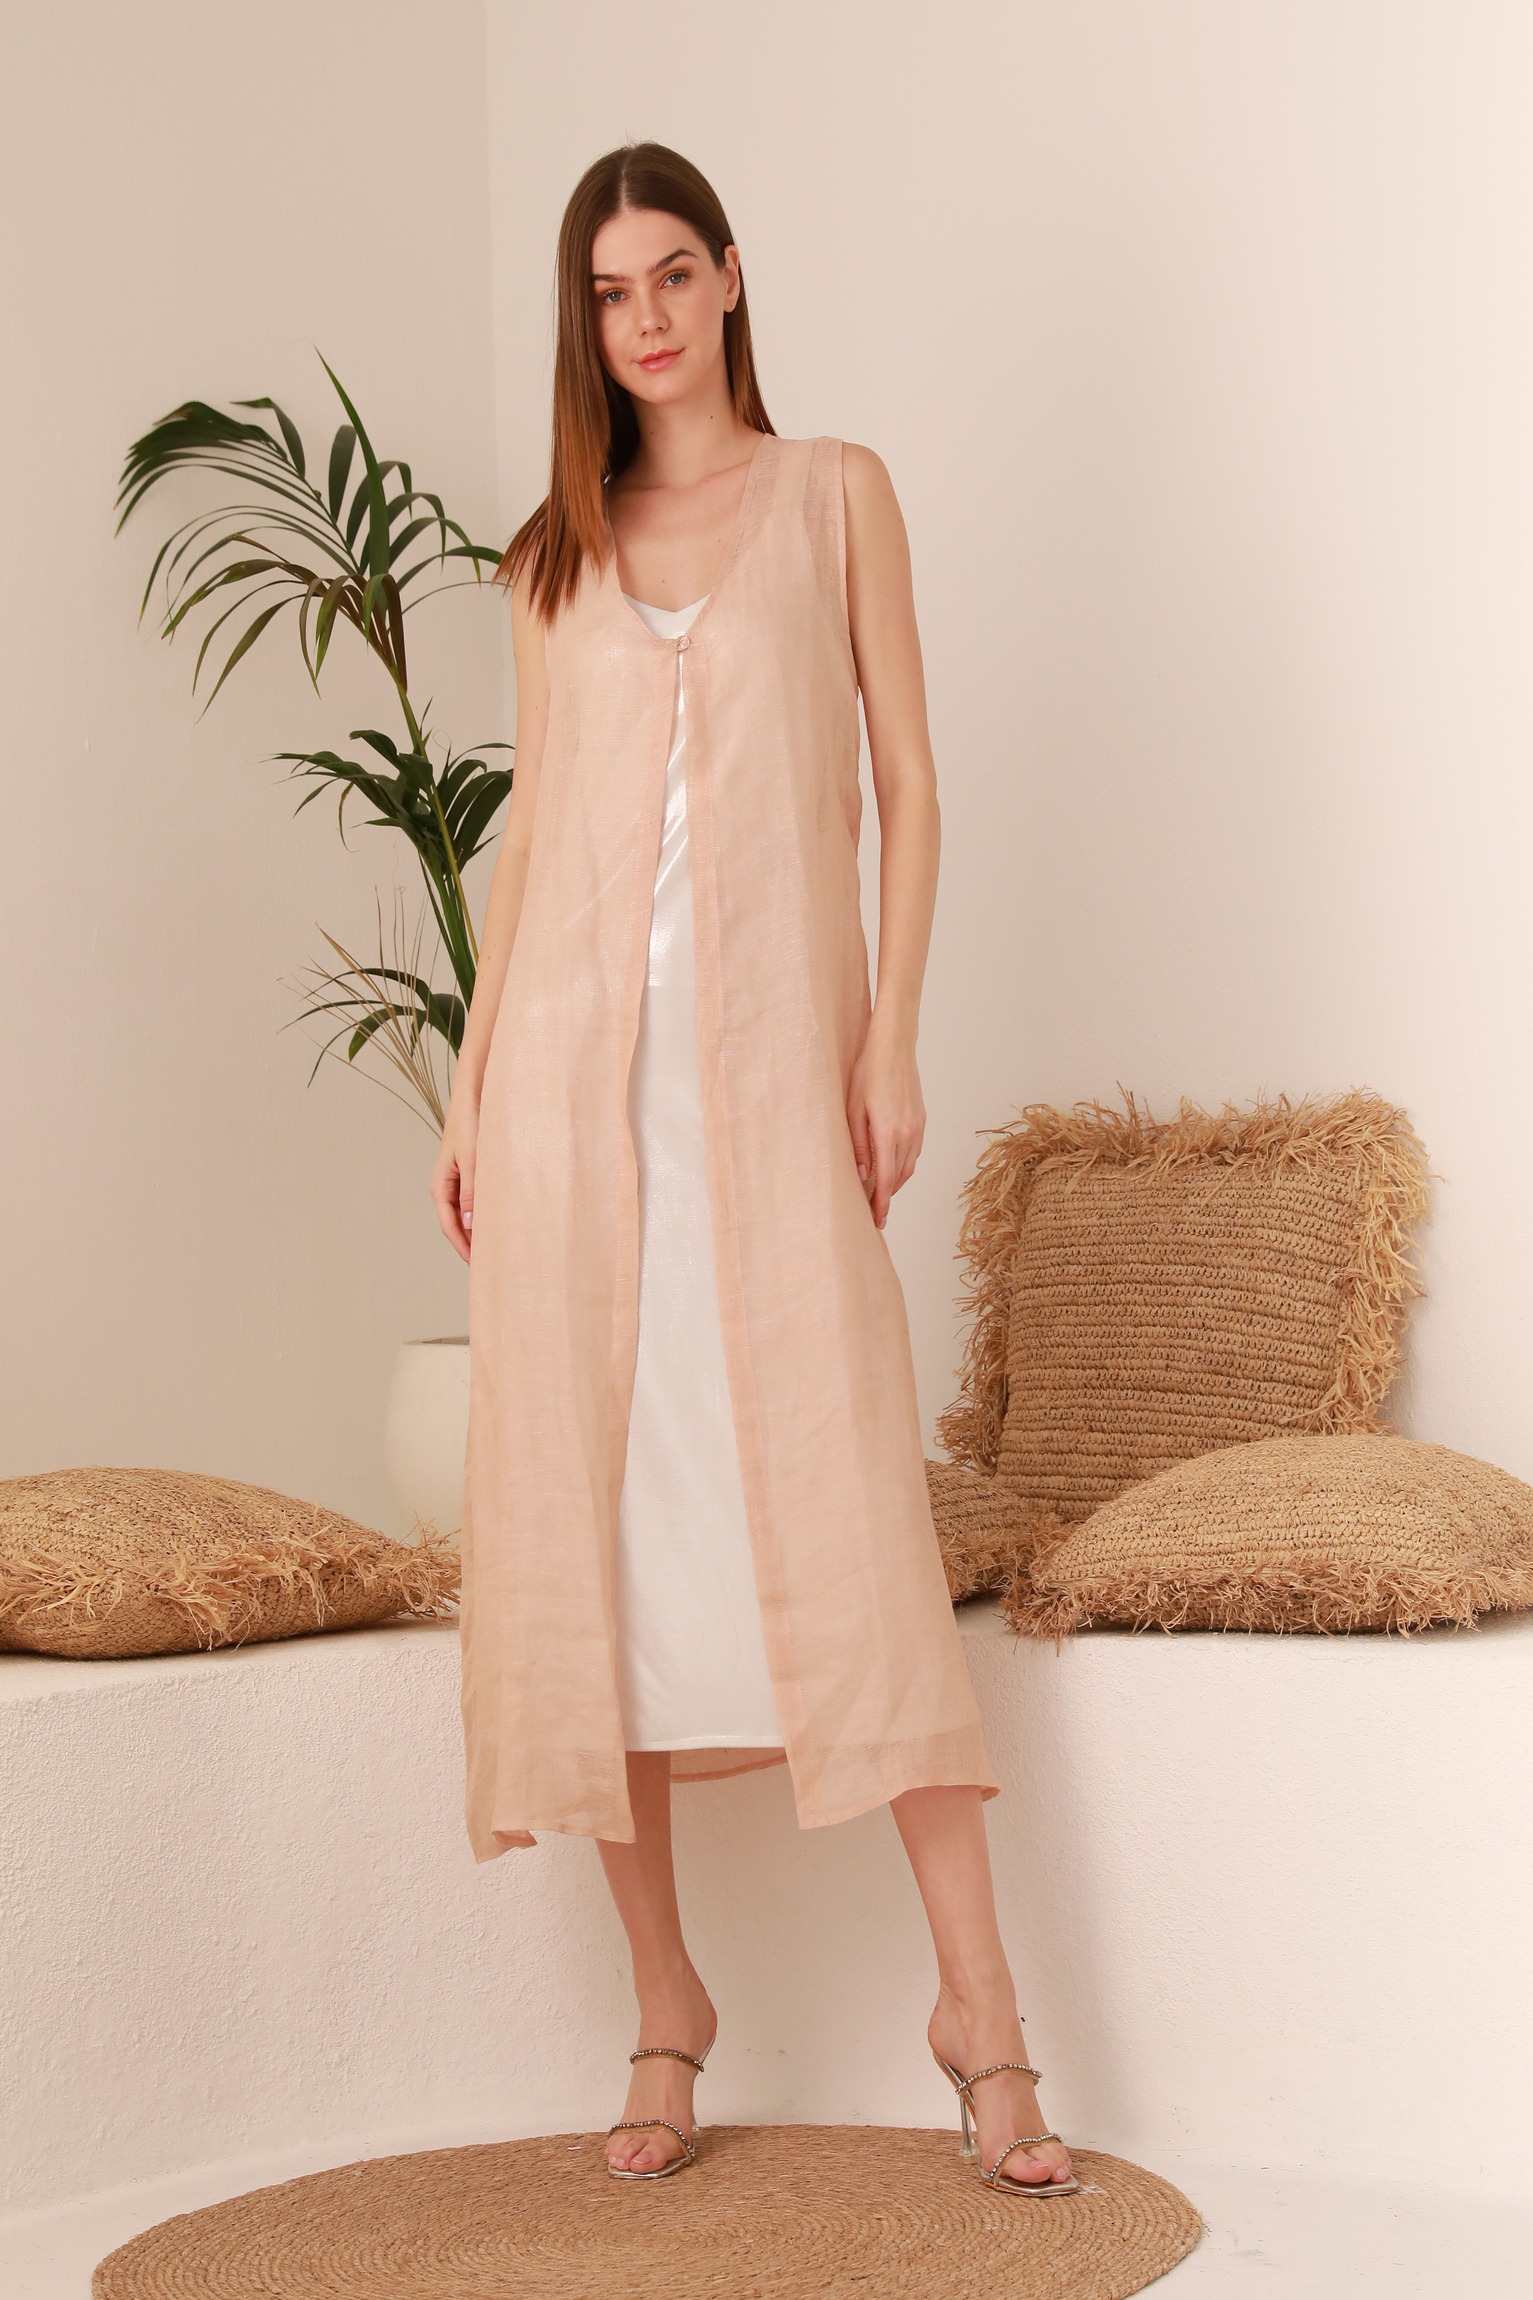 WHITE/PEACH LINEN DRESS WITH CARDIGAN